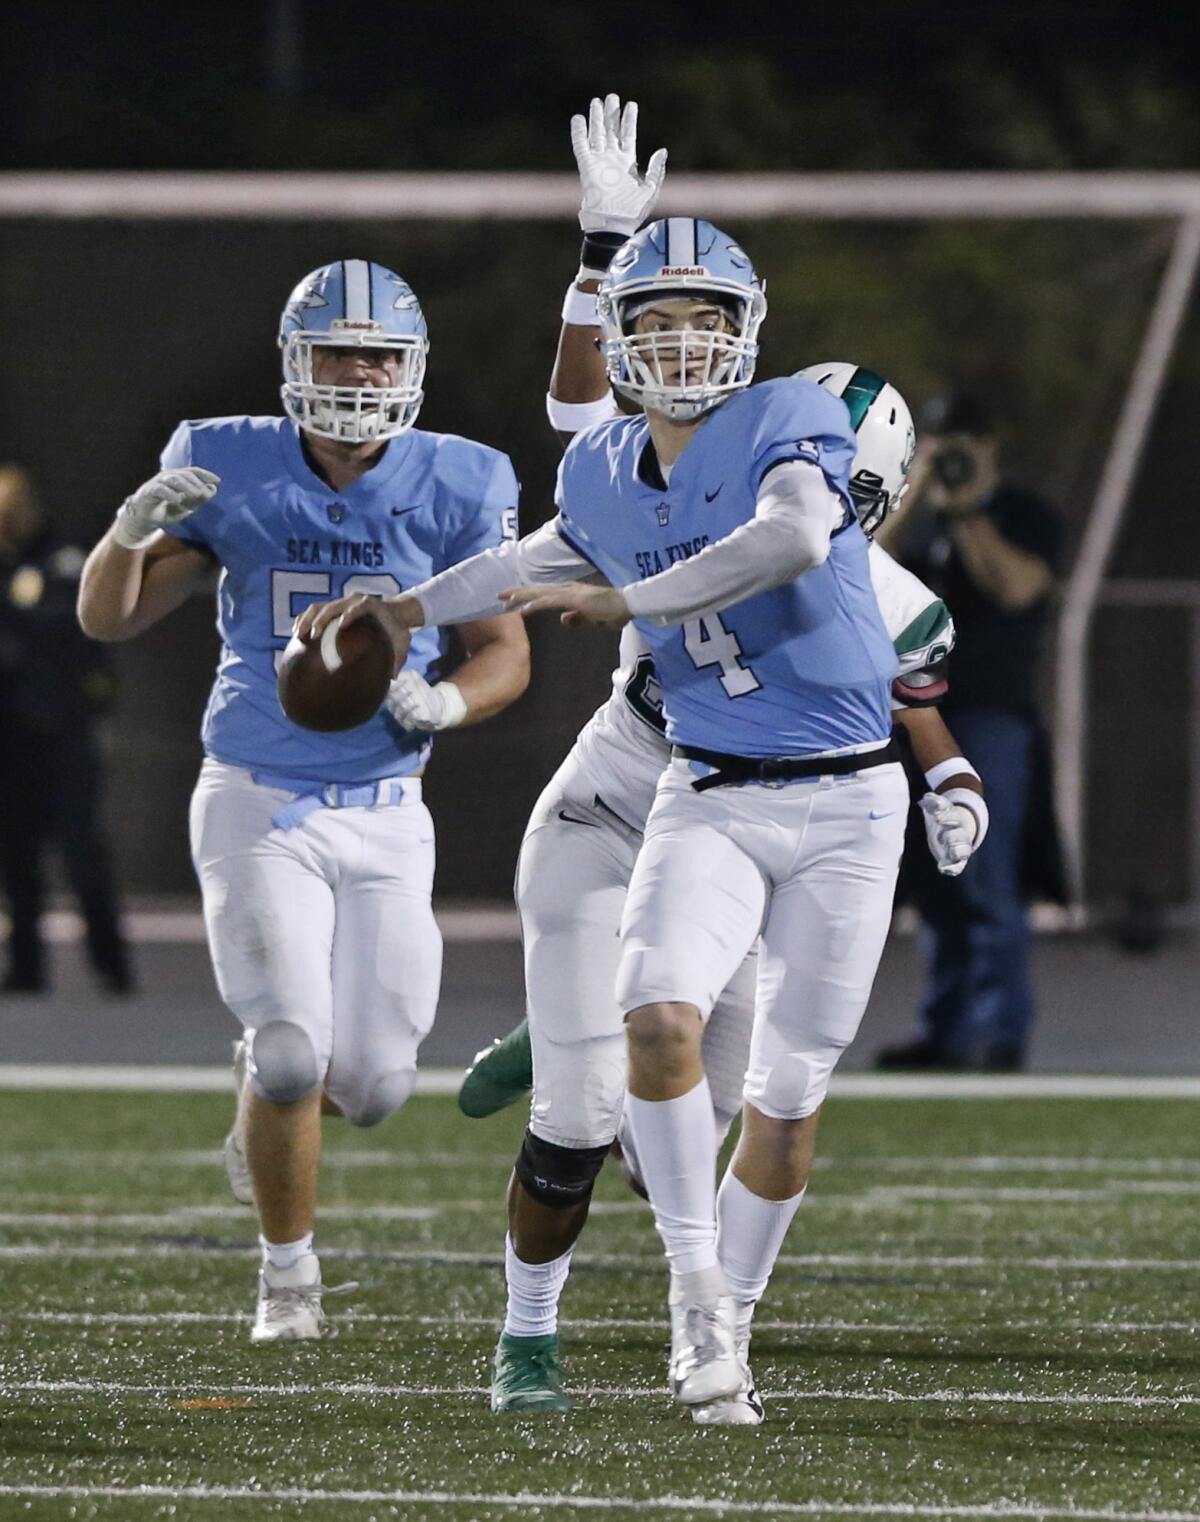 Corona del Mar's Ethan Garbers avoids the rush in the CIF State Southern California Regional Division 1-A Bowl Game against Oceanside on Dec. 7 at Newport Harbor High.